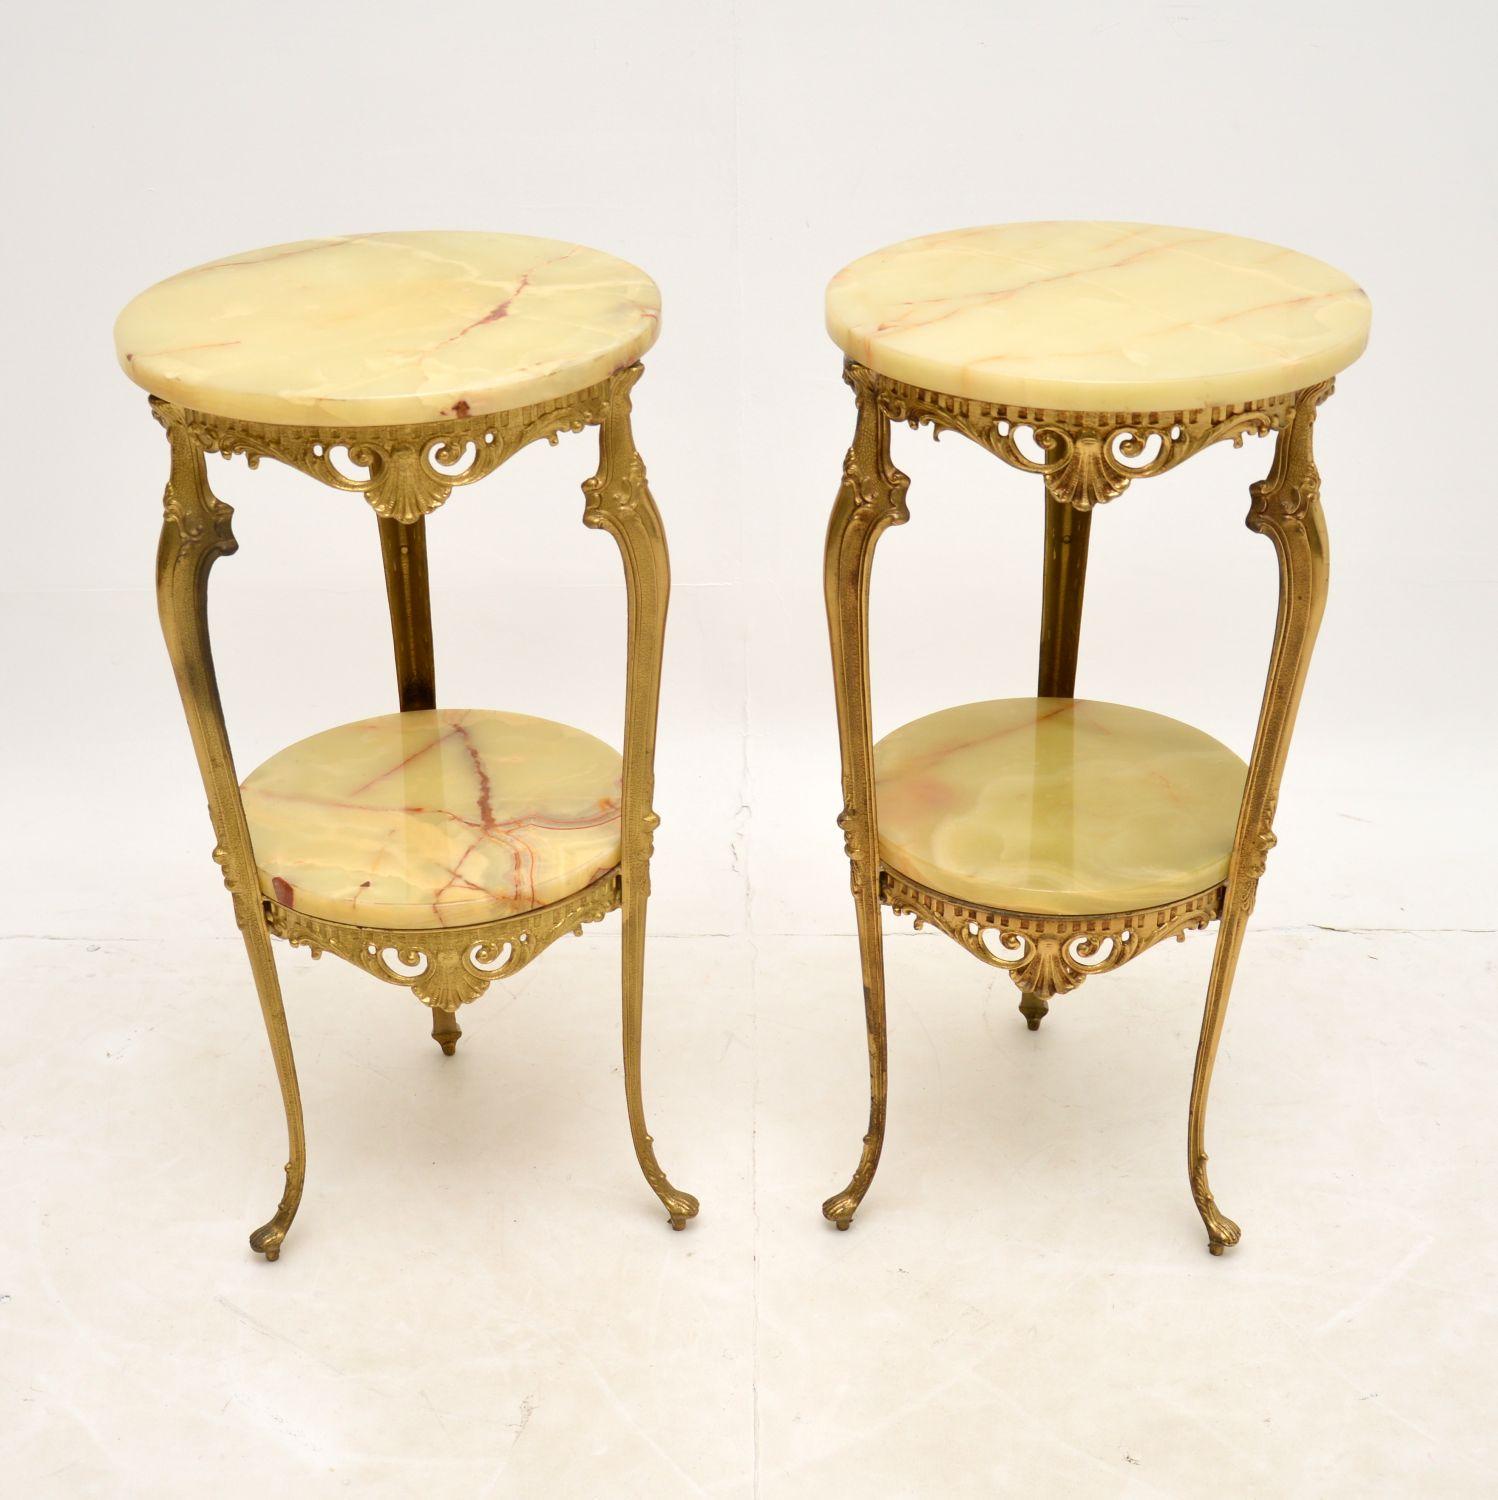 A beautifully made pair of French vintage side tables dating from around the 1930-50’s period.

These are of great quality and are a very useful size. The onyx has a lovely colour tone and beautiful patterns. The onyx is removable on the lower and